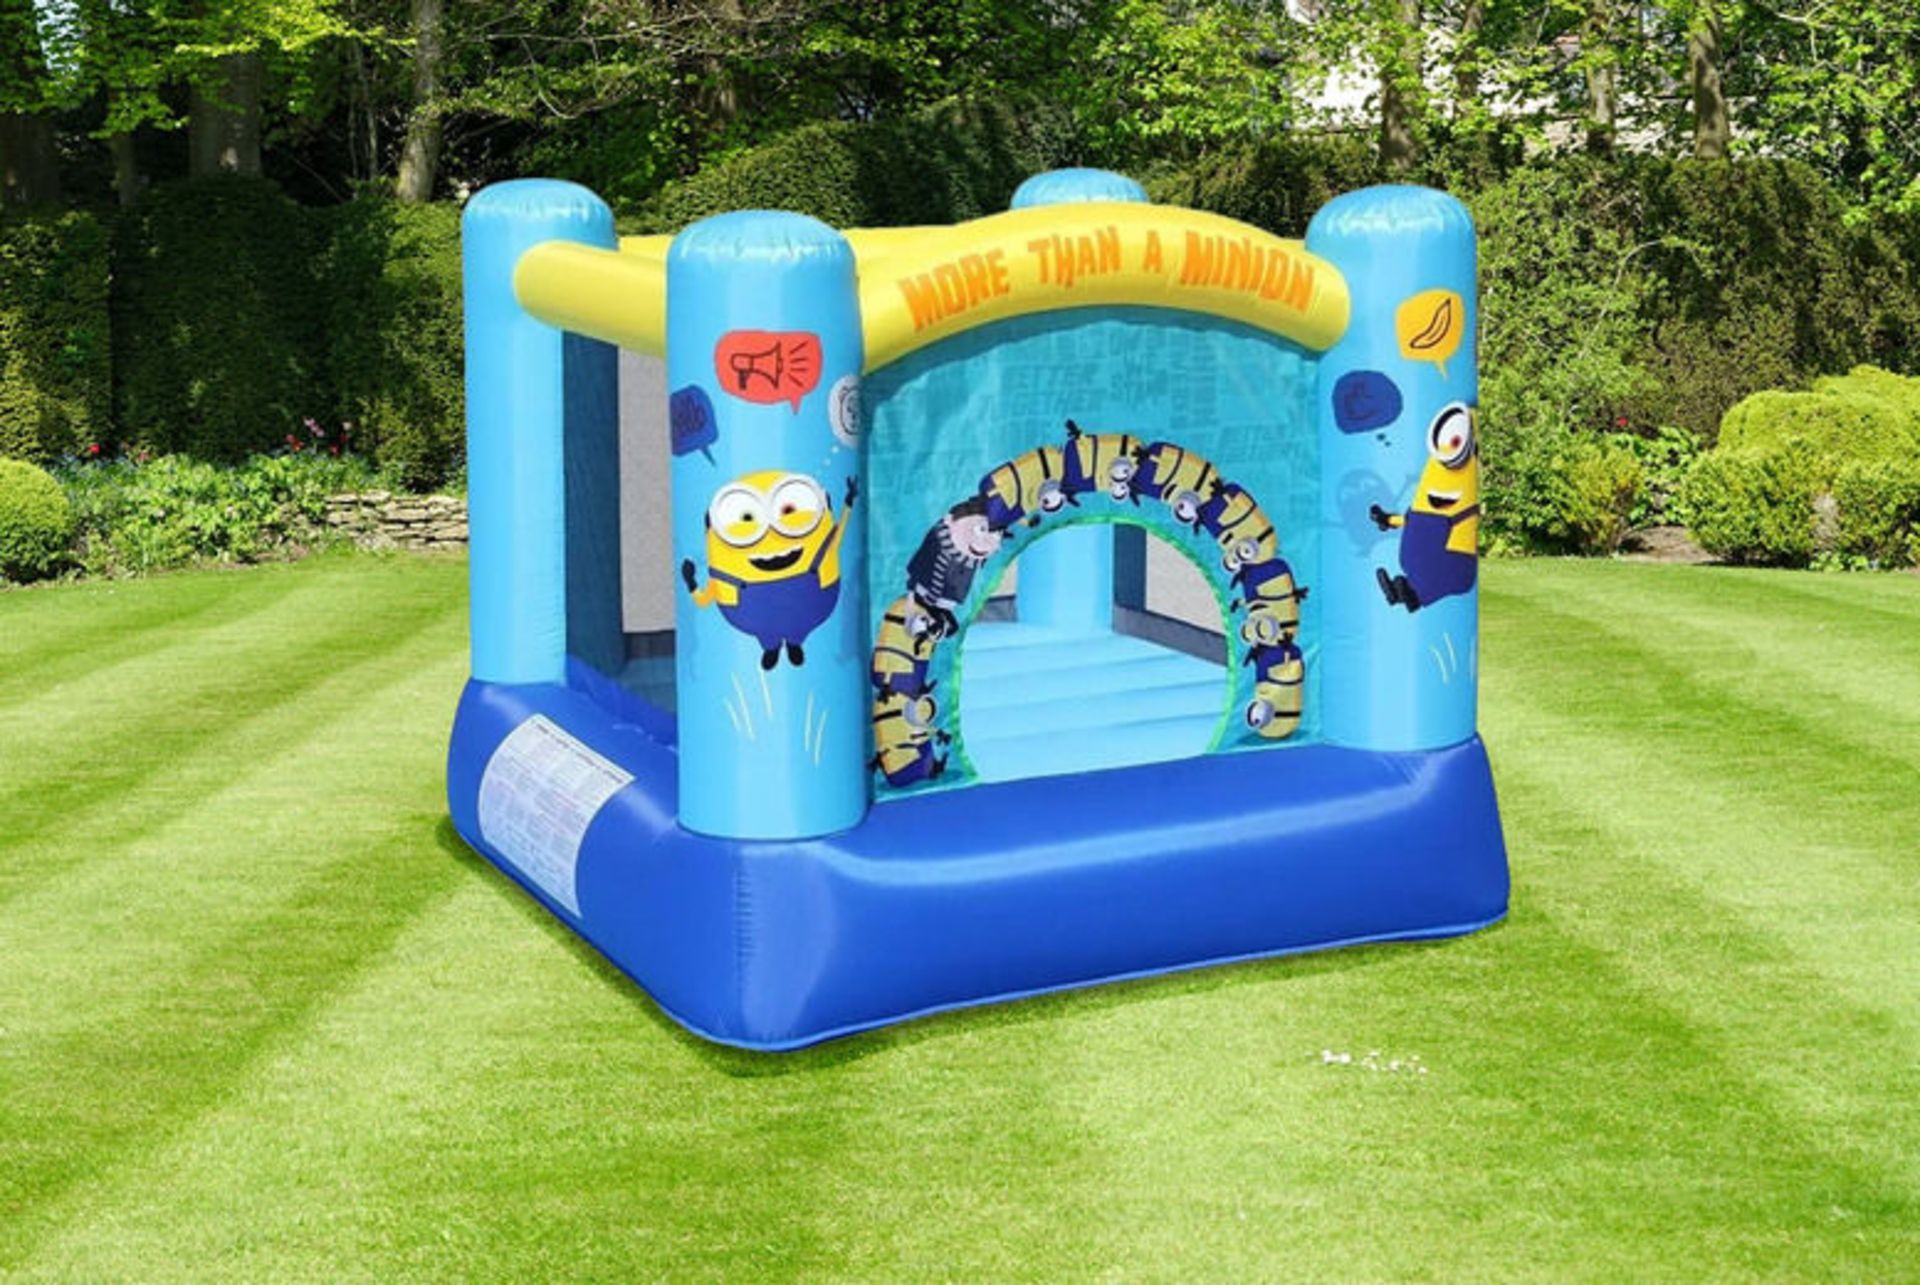 New & Boxed Minions Inflatable Bouncy Castle. RRP £219.99 each. Playtime Joy: The Plum Minions